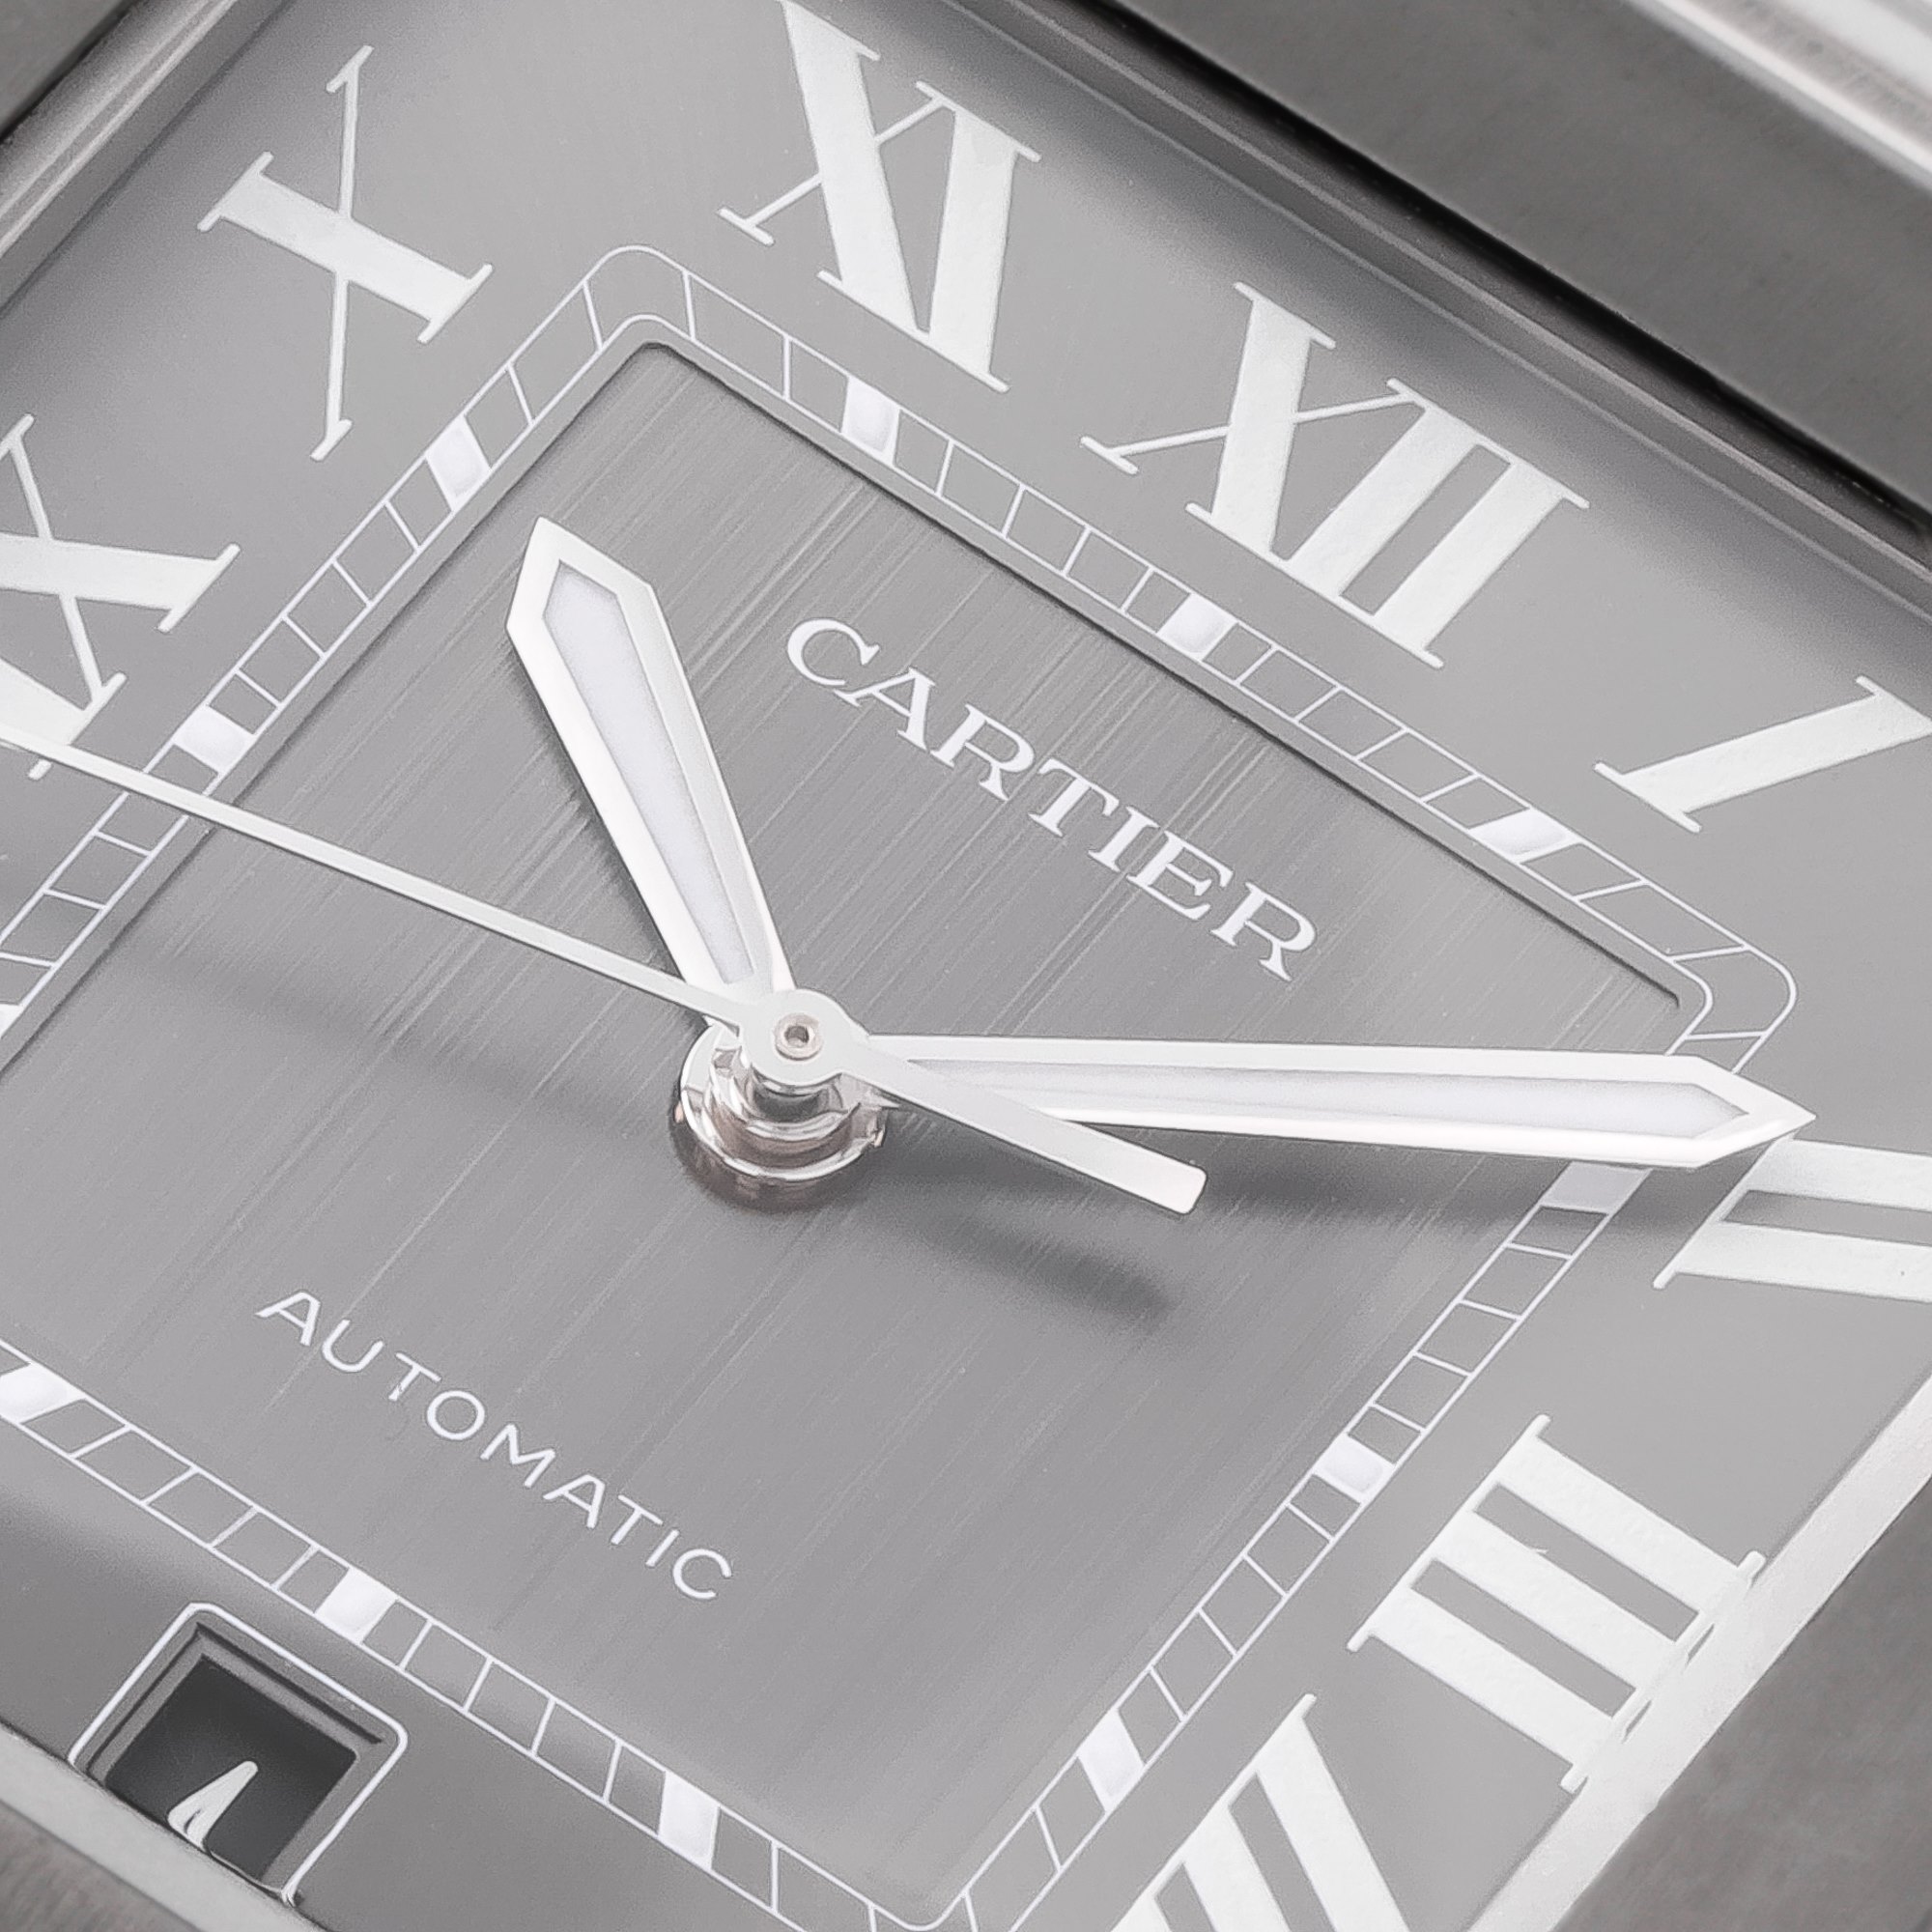 Cartier Santos Large Stainless Steel WSSA0037 or 4072